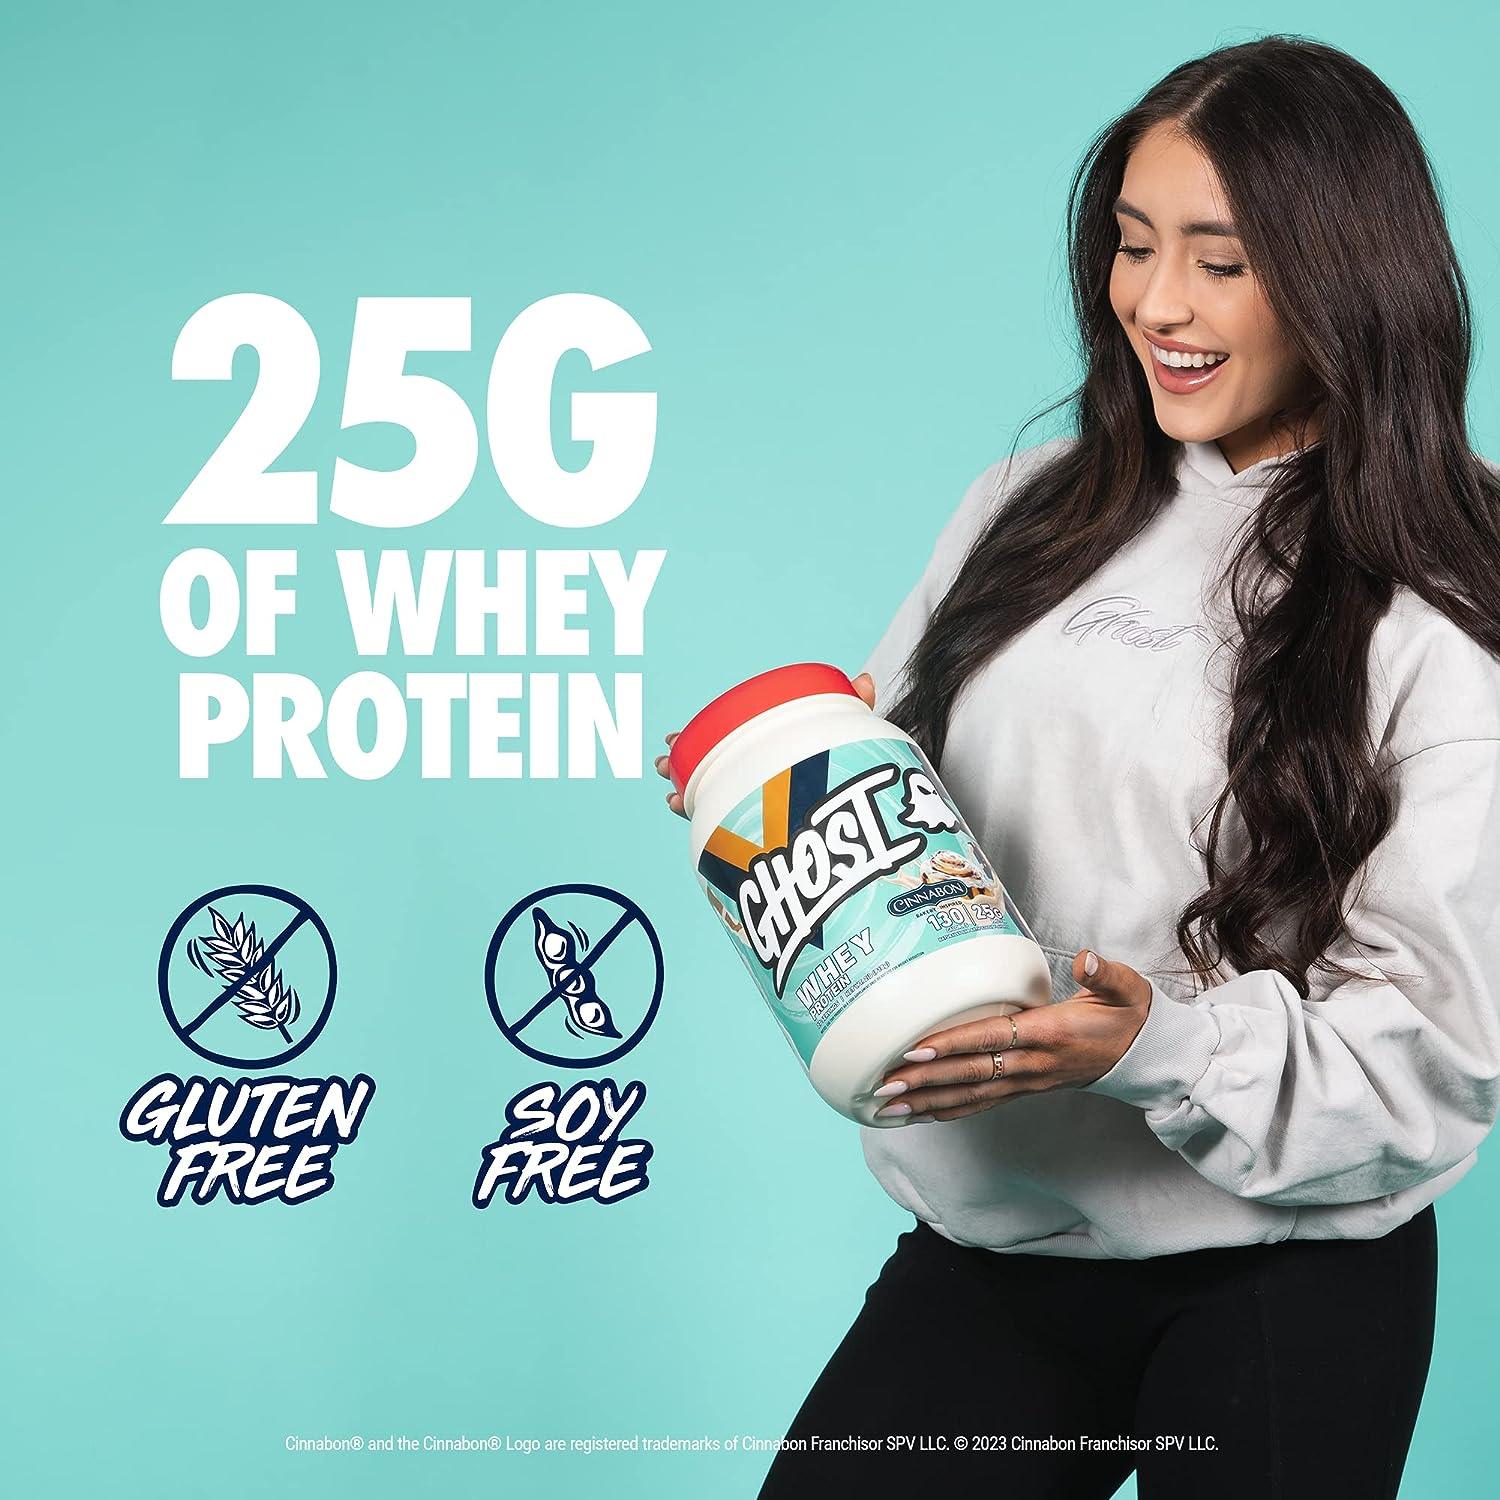 Ghost Whey Protein Powder - 2lb, 25g Of Protein - Wellness Shoppee